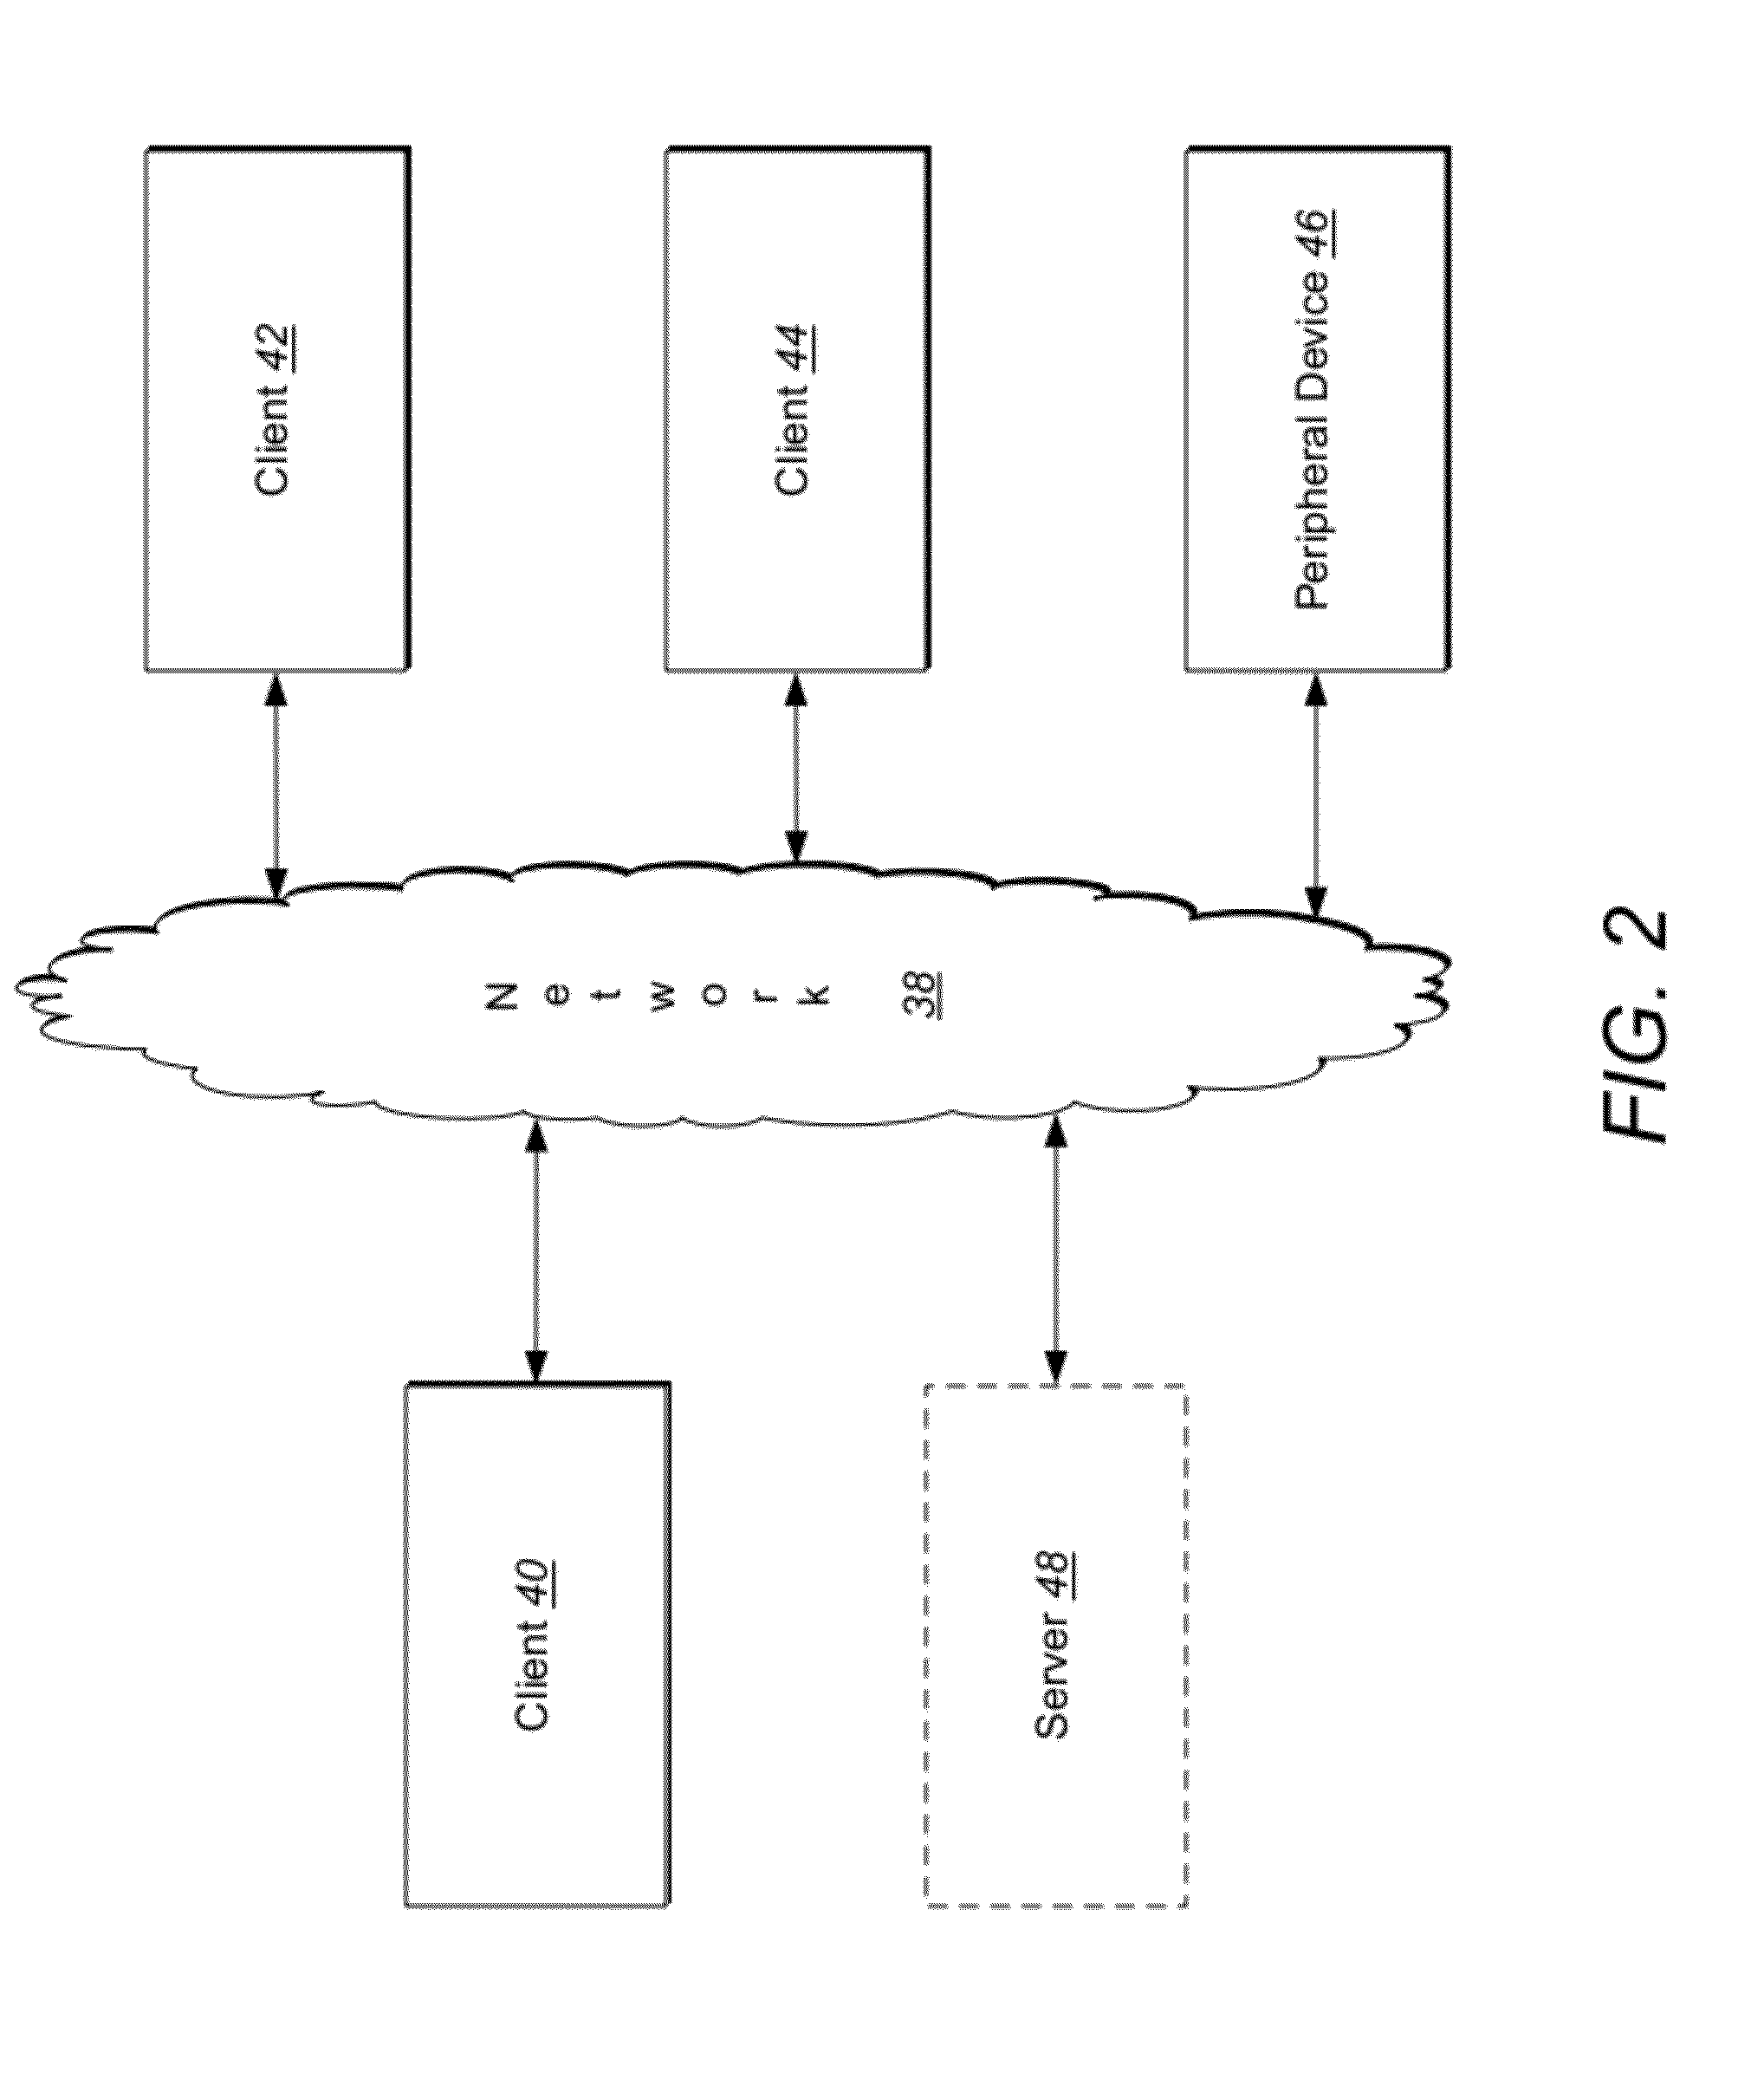 Systems and Methods for Online Session Sharing